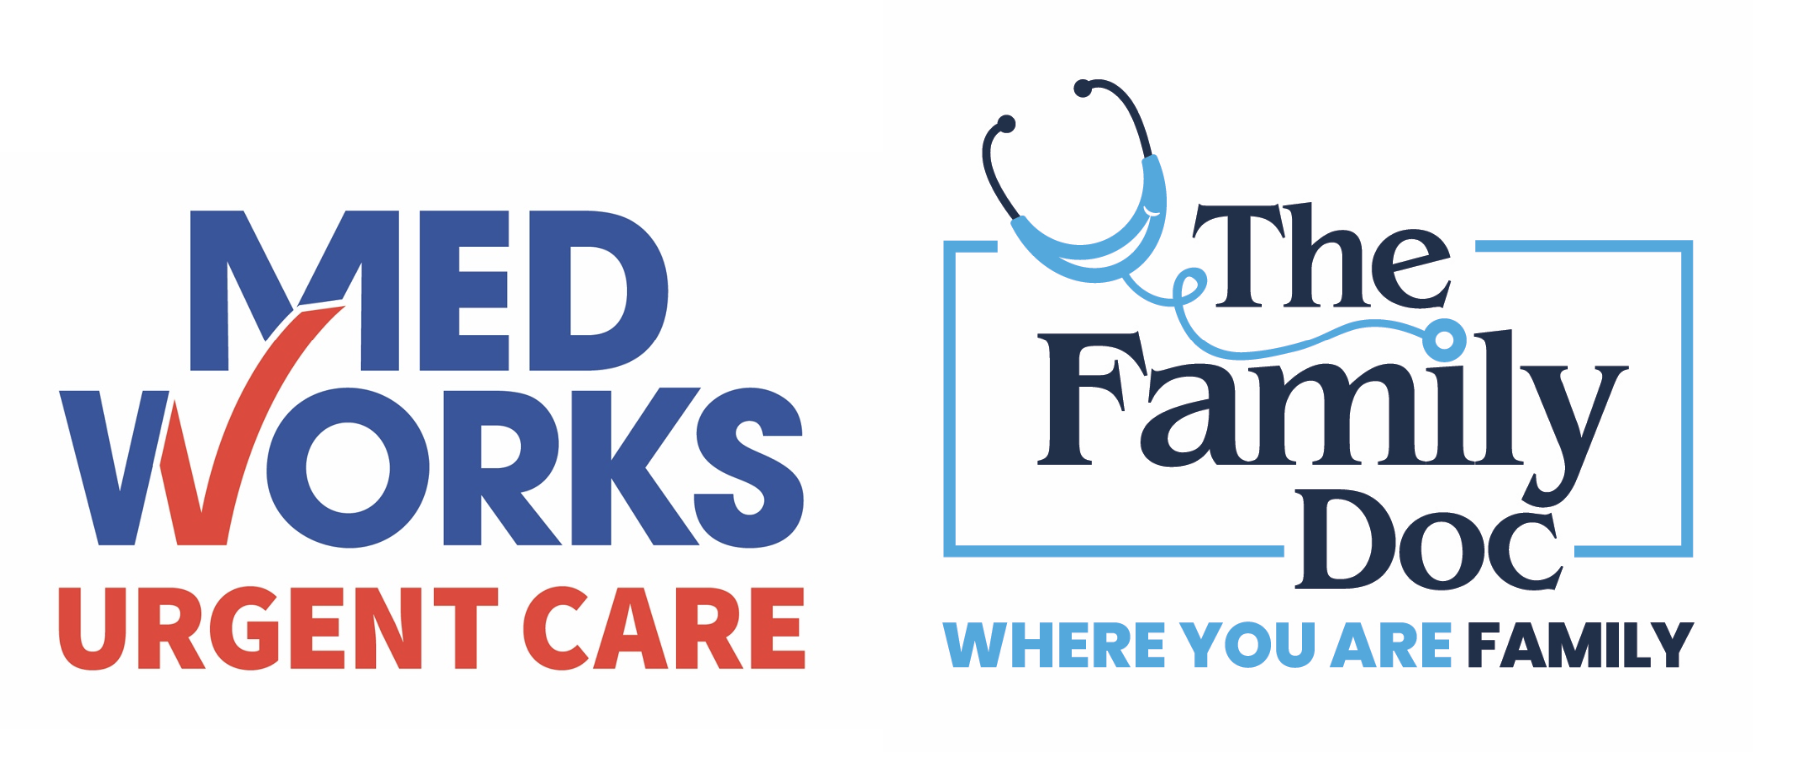 Medworks Urgent Care And Family Doc Clinic - Virtual Visit Logo